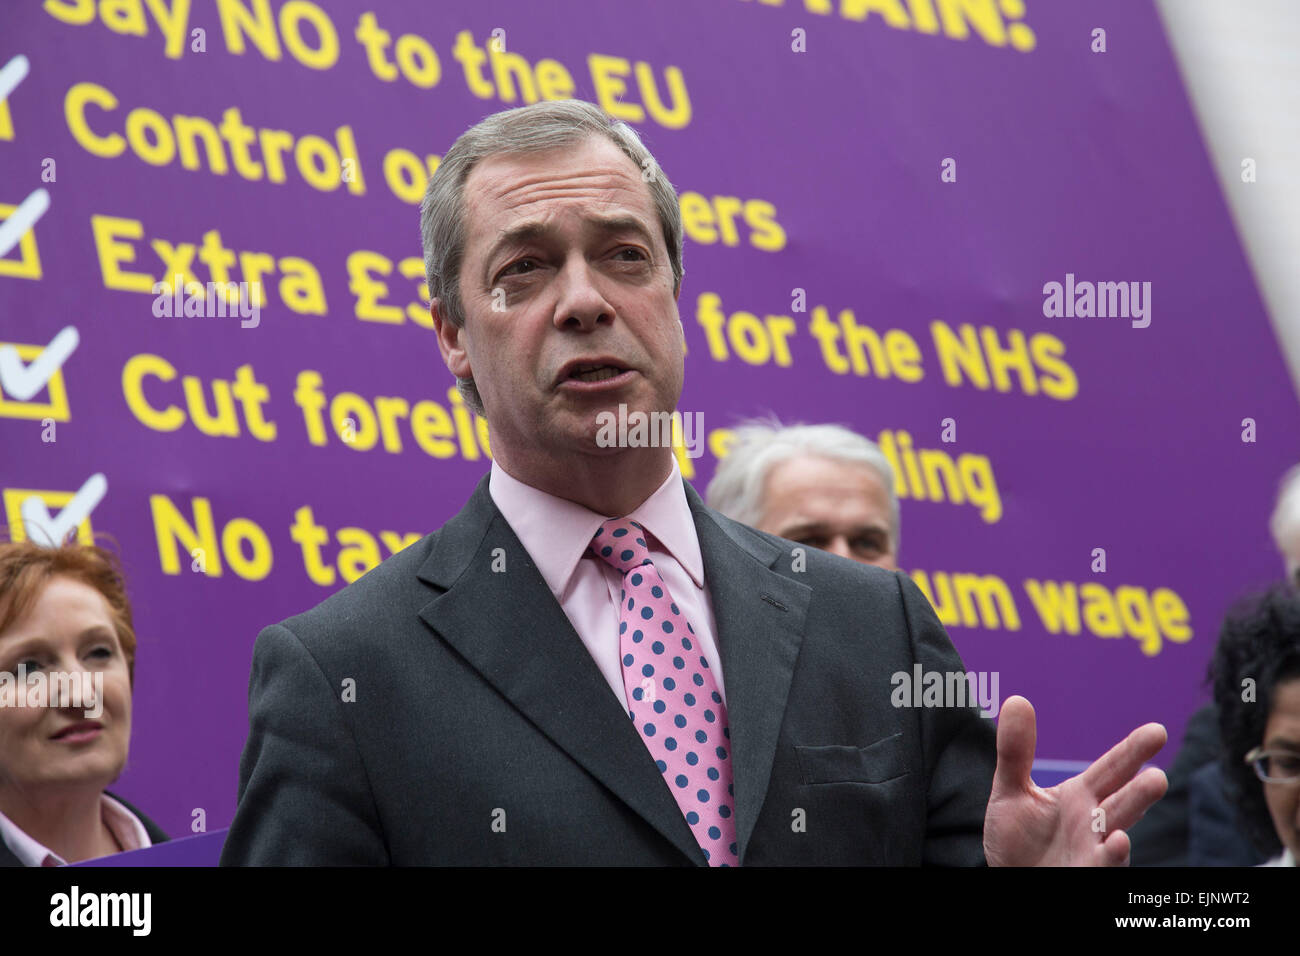 London, UK. Monday 30th March 2015. Ukip leader Nigel Farage MP announces his party's key election pledges at Smith Square, Westminster. The UK Independence Party, is a right-wing political party in the United Kingdom. Stock Photo